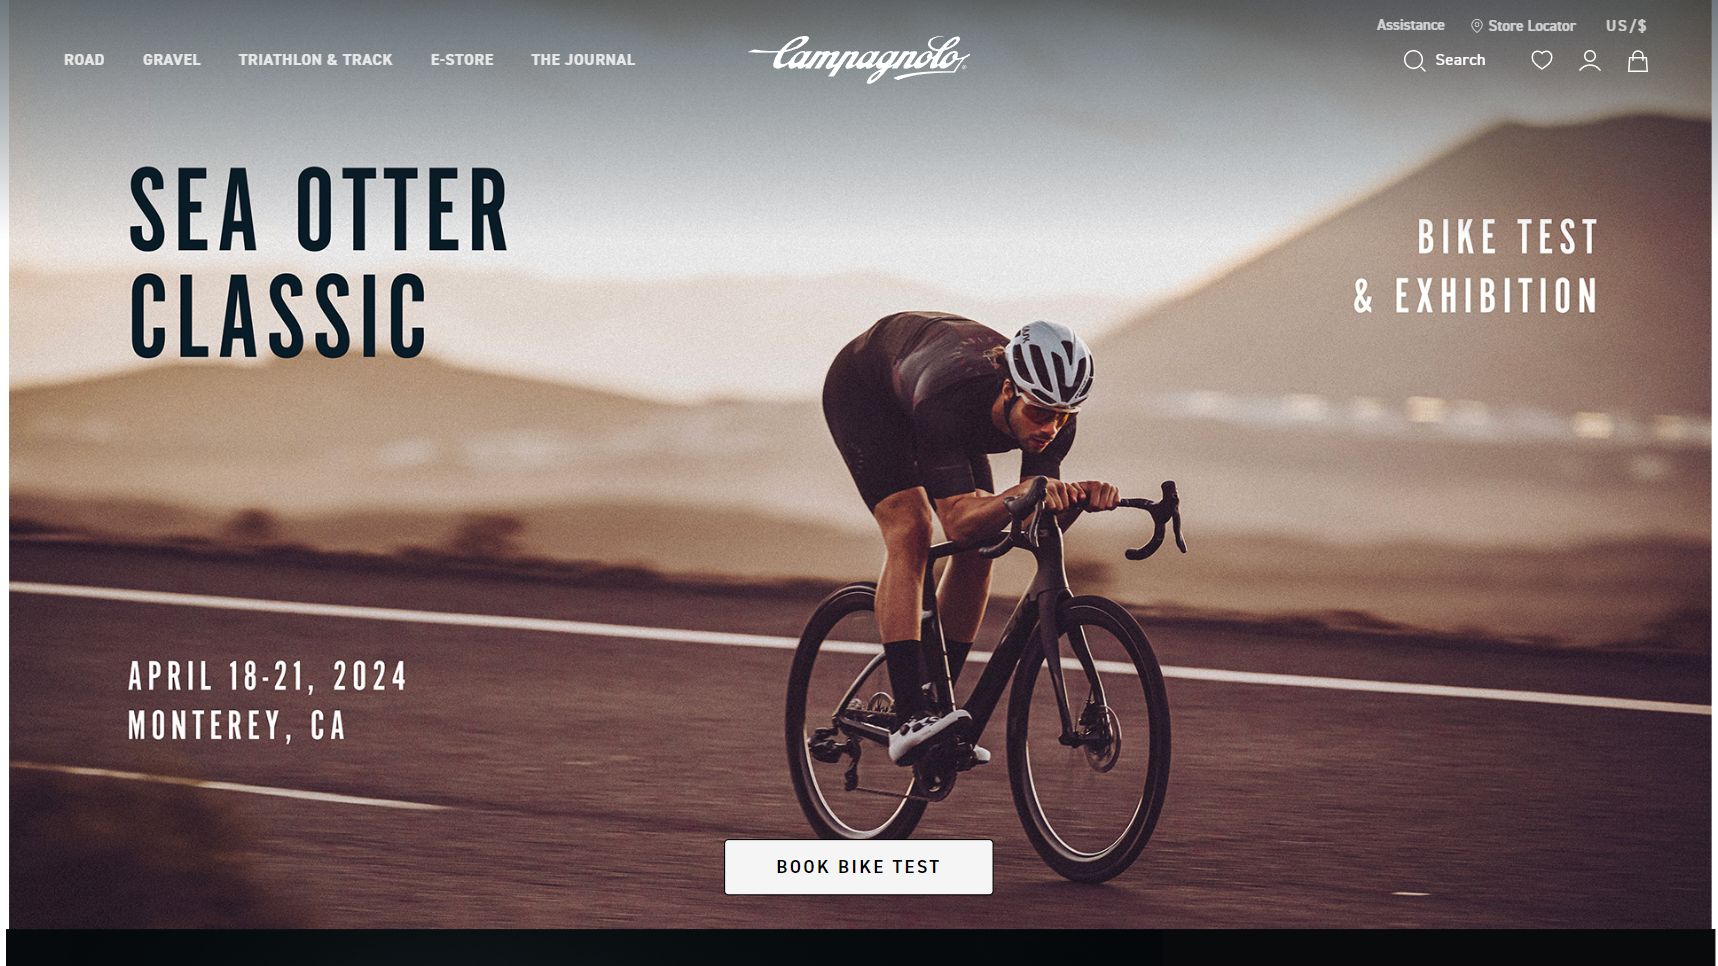 Campagnolo - Bicycle Parts Manufacturer